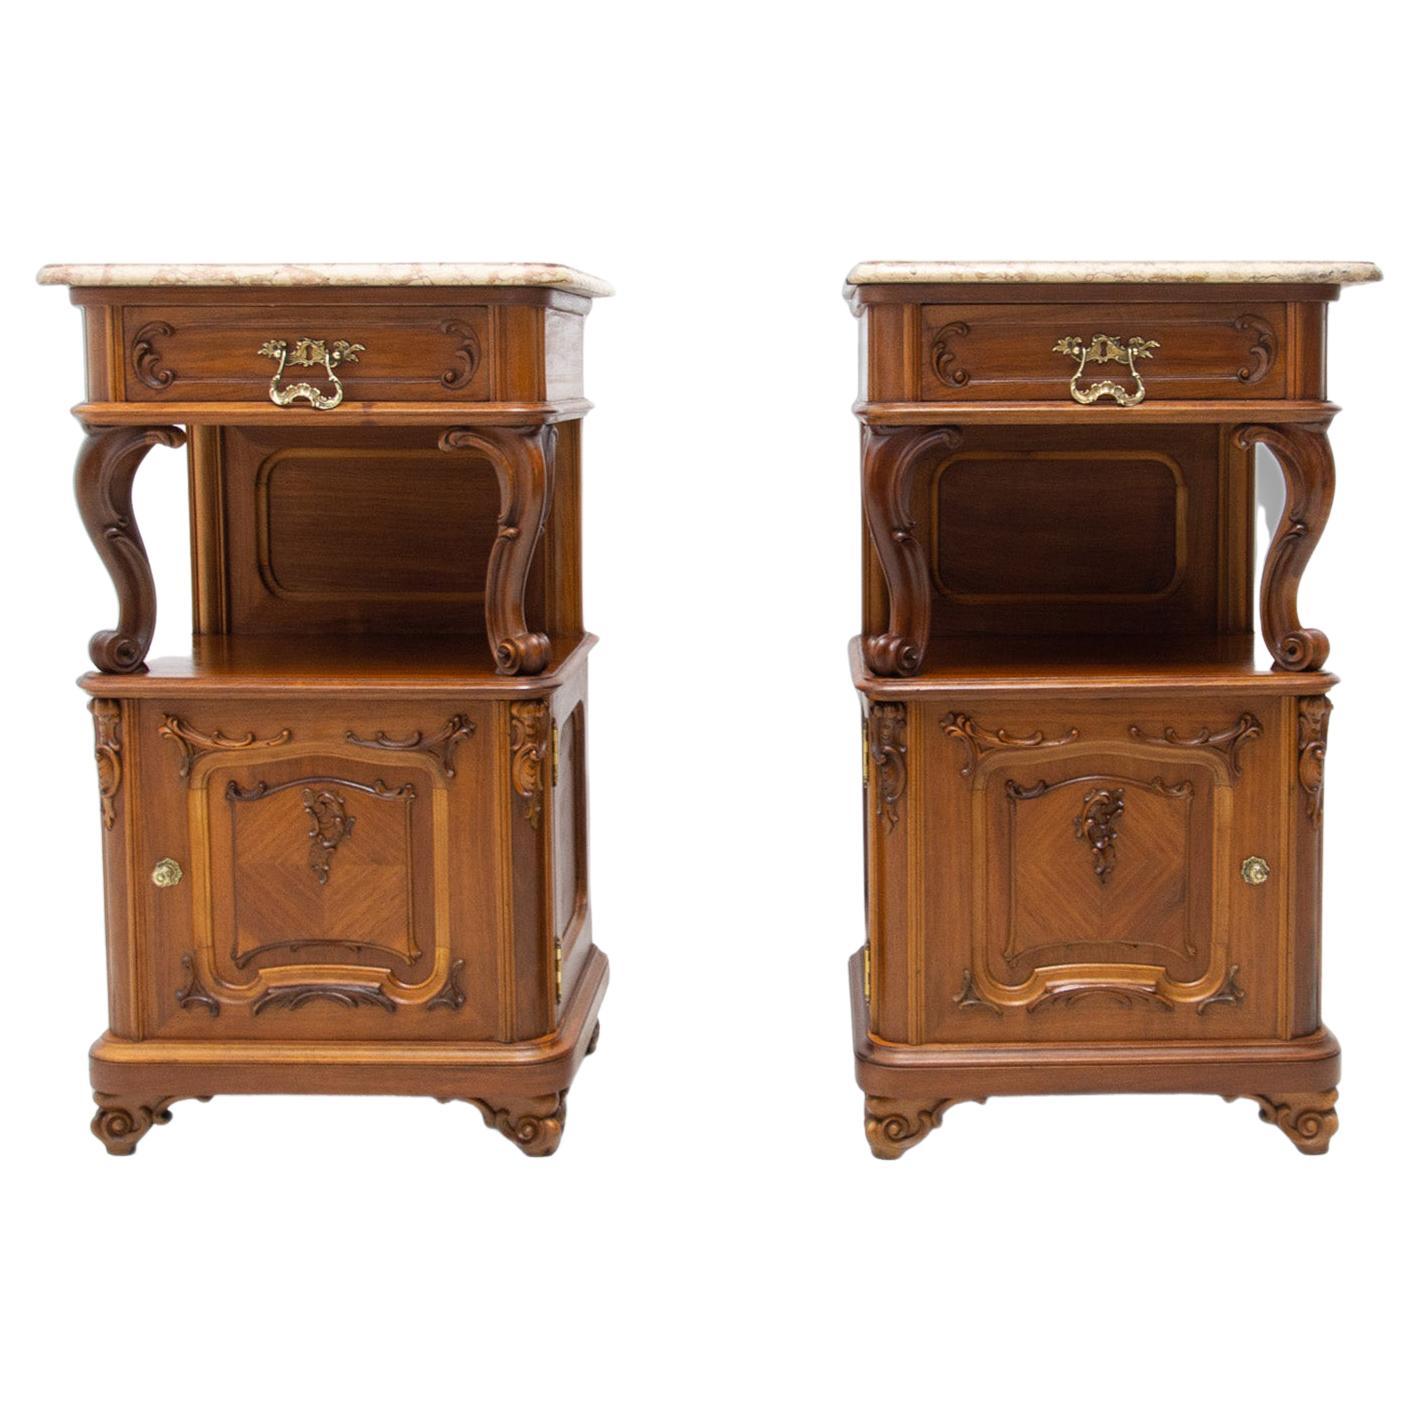 Pair of Fully Restored Historicist Bedside Tables, 1910, Austria For Sale